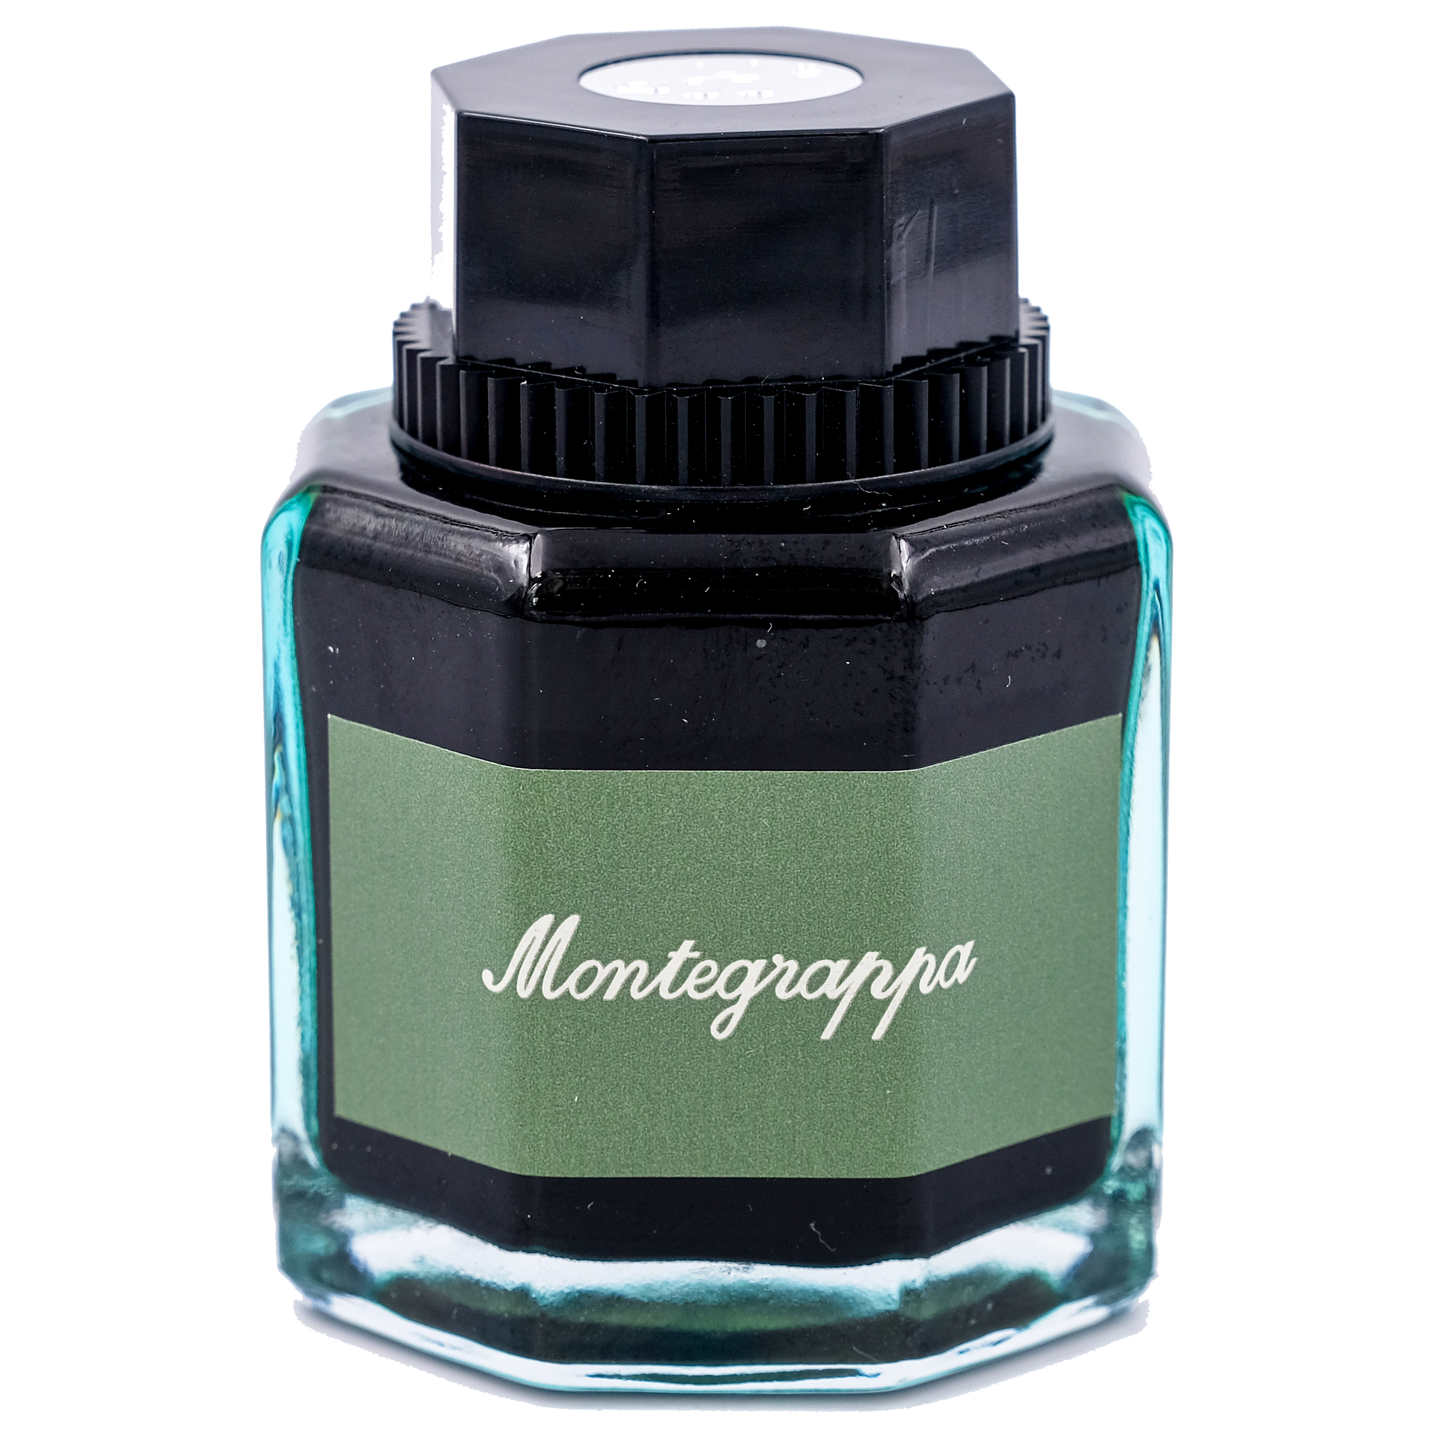 Montegrappa Tinte Turquoise 50ml - Green packaging